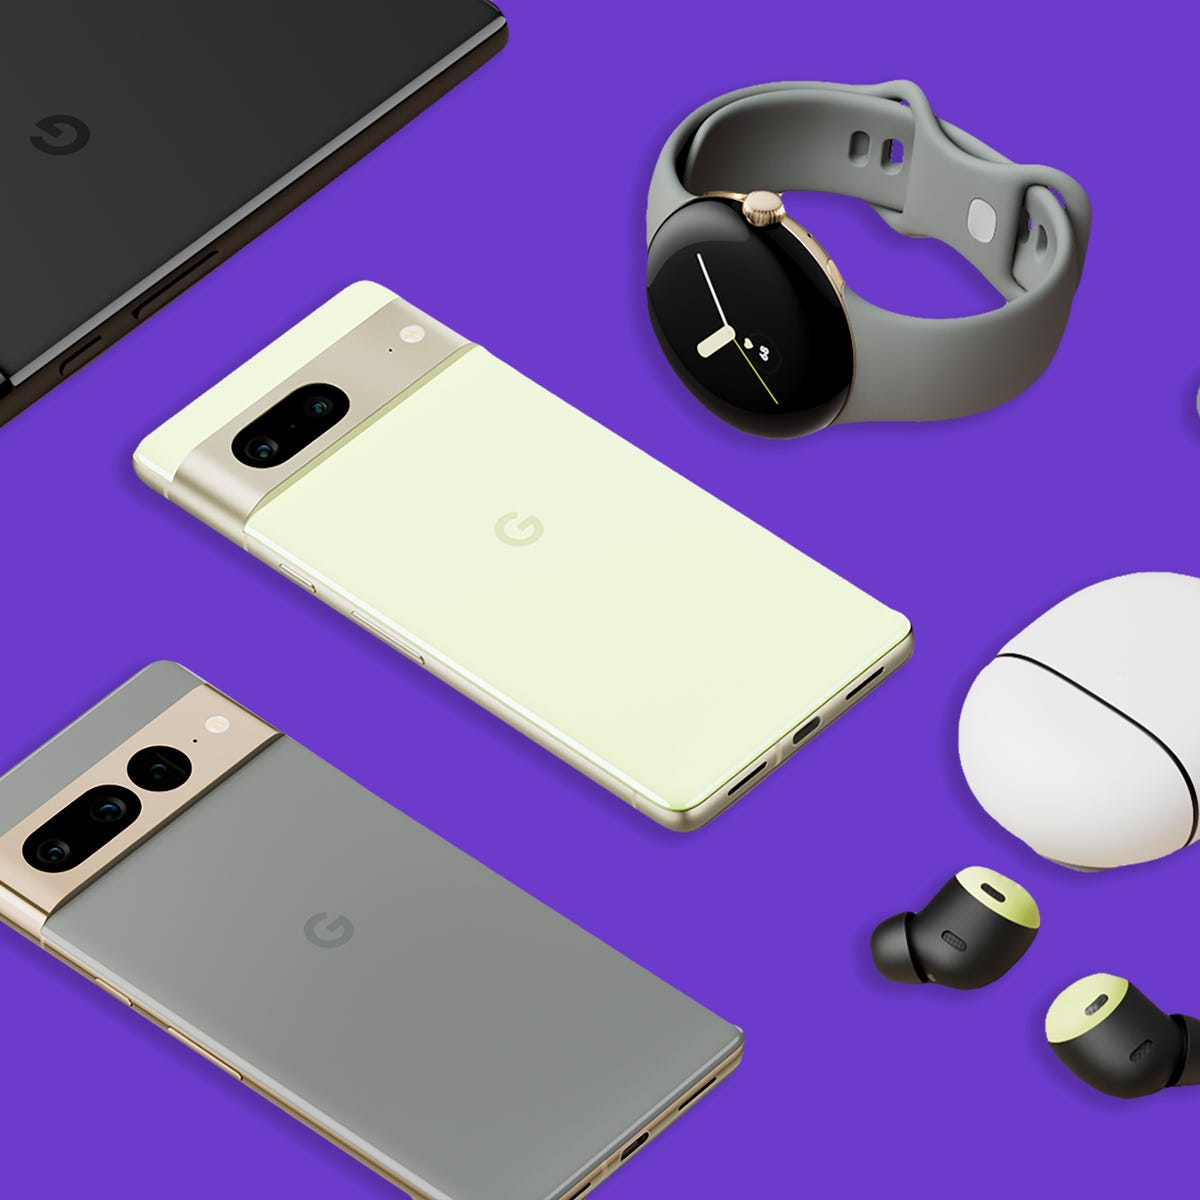 All The Gadgets Presented at Google's Event